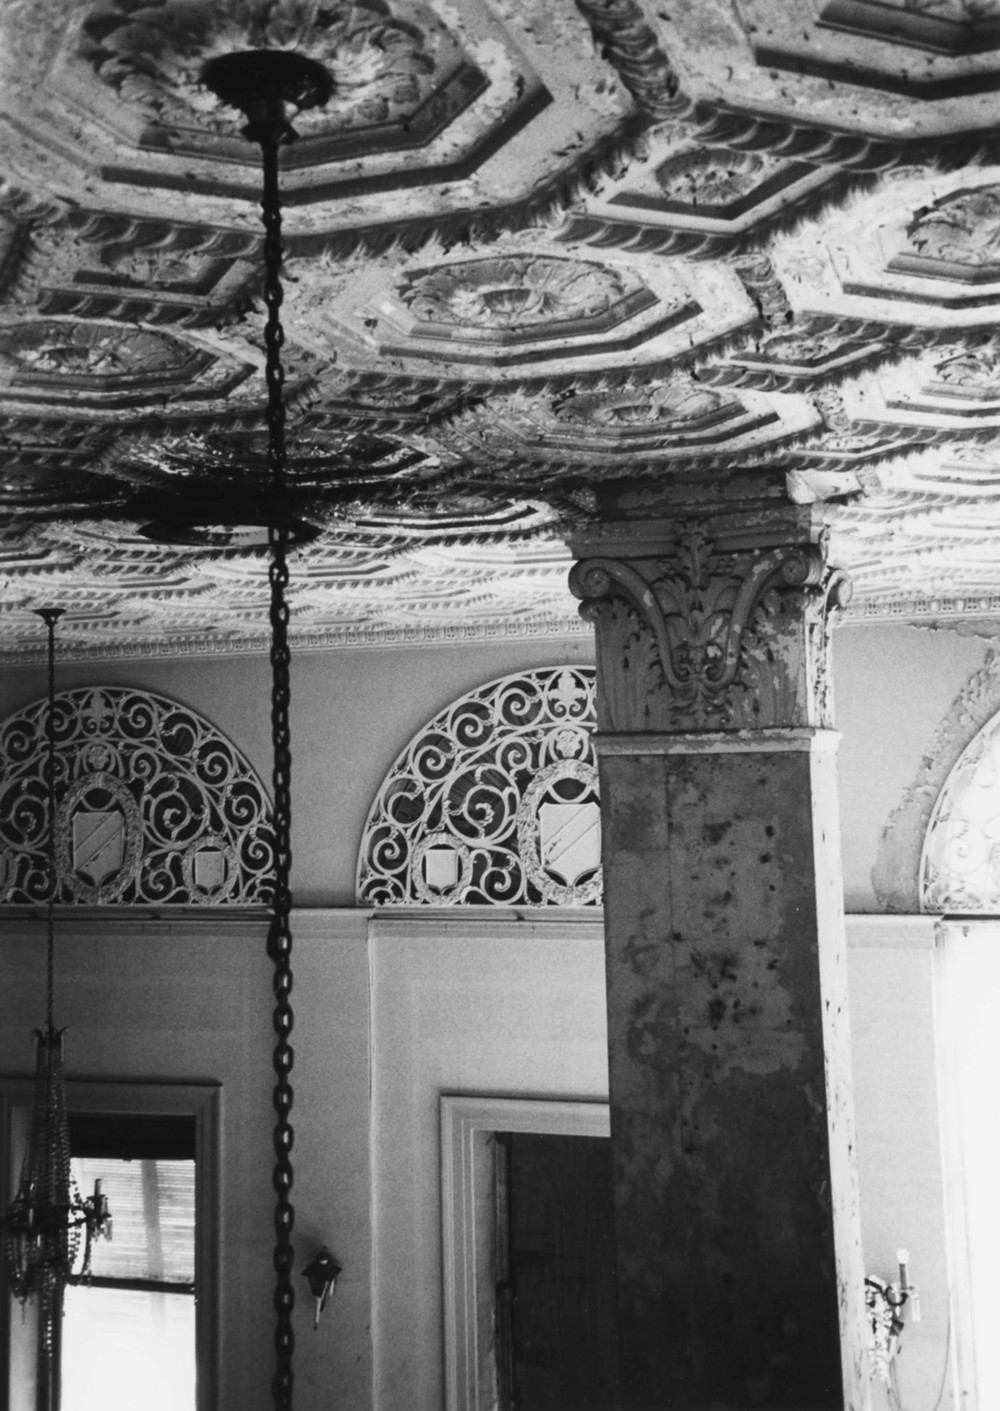 Floridan Hotel, Tampa Florida Column and ceiling detail in dining hall looking southeast (1995)